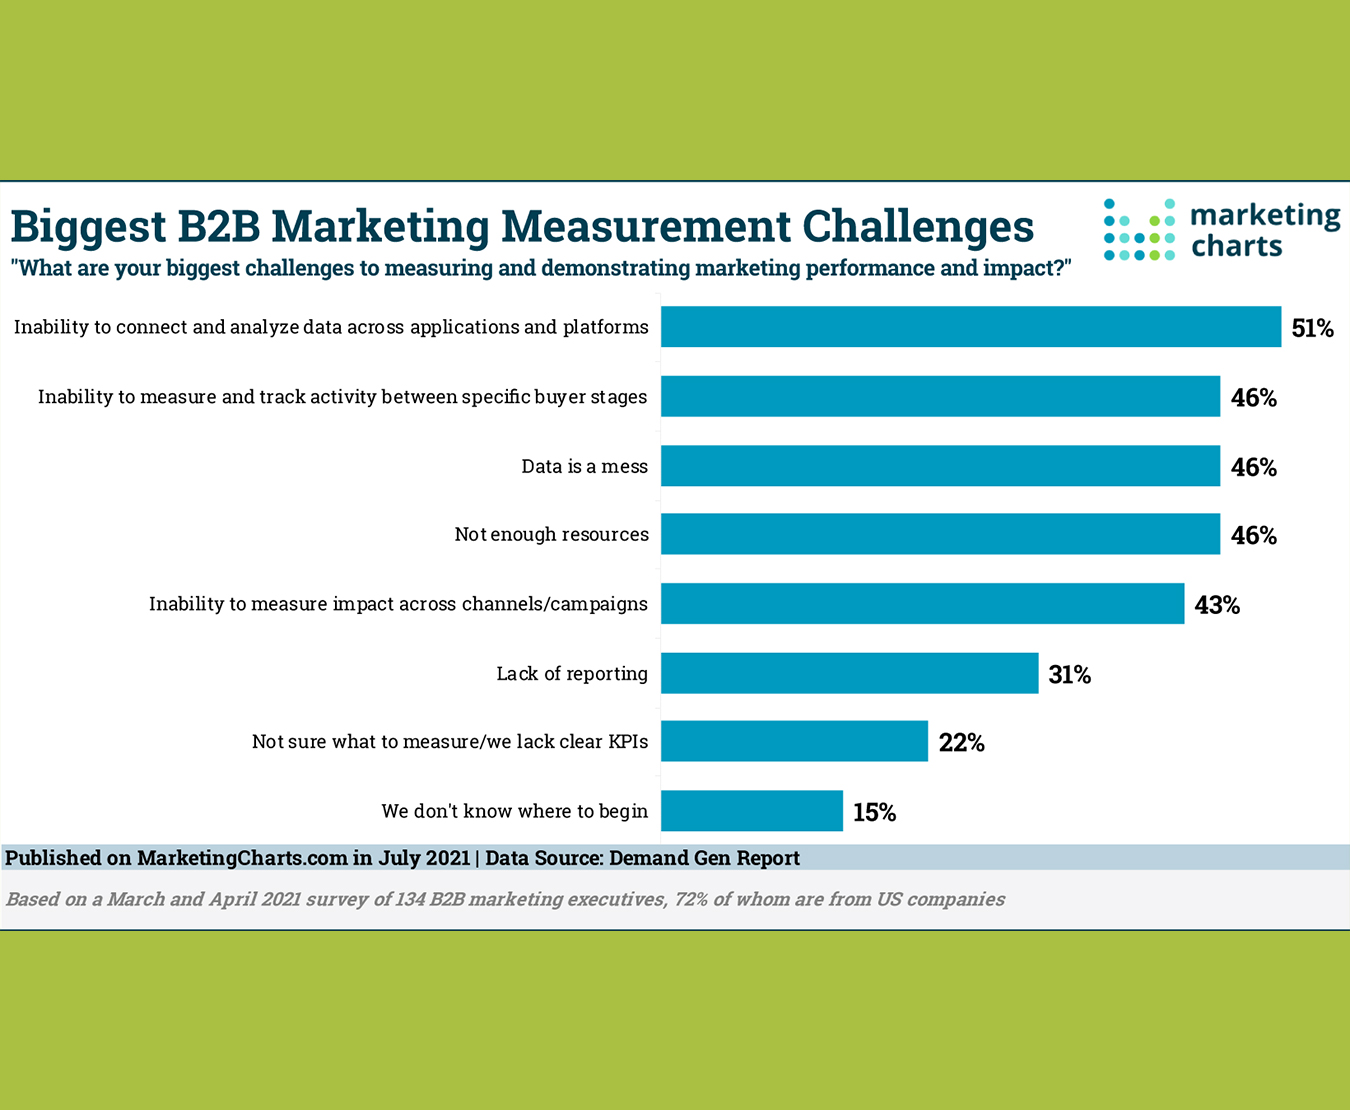 Common B2B marketing measurement challenges include B2B website lead tracking of buyrer activity between stages (46% endorsed))